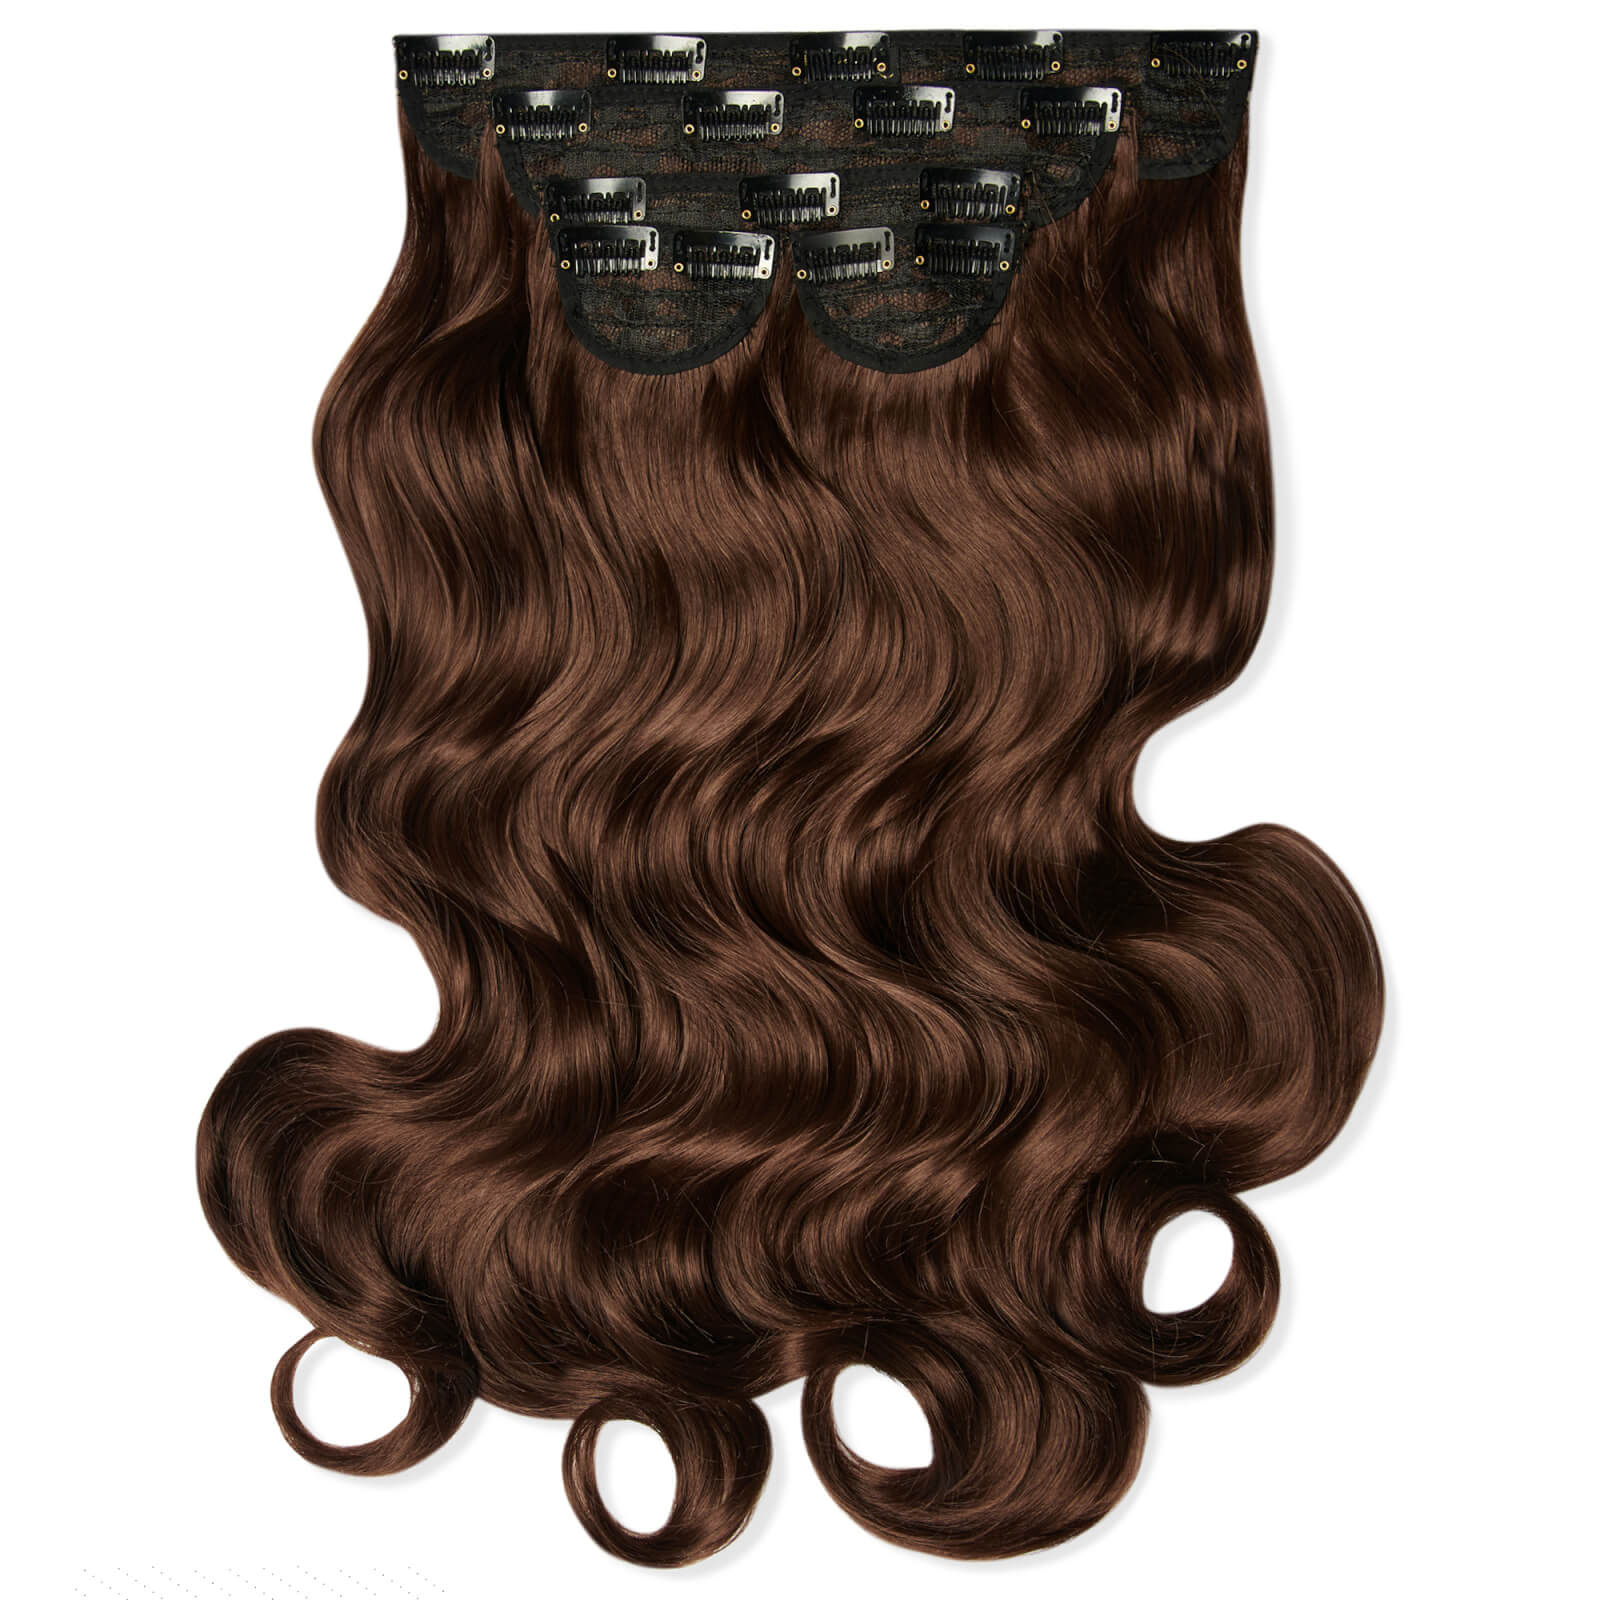 Image of LullaBellz Super Thick 22 5 Piece Curly Clip In Extensions (Various Shades) - Choc Brown